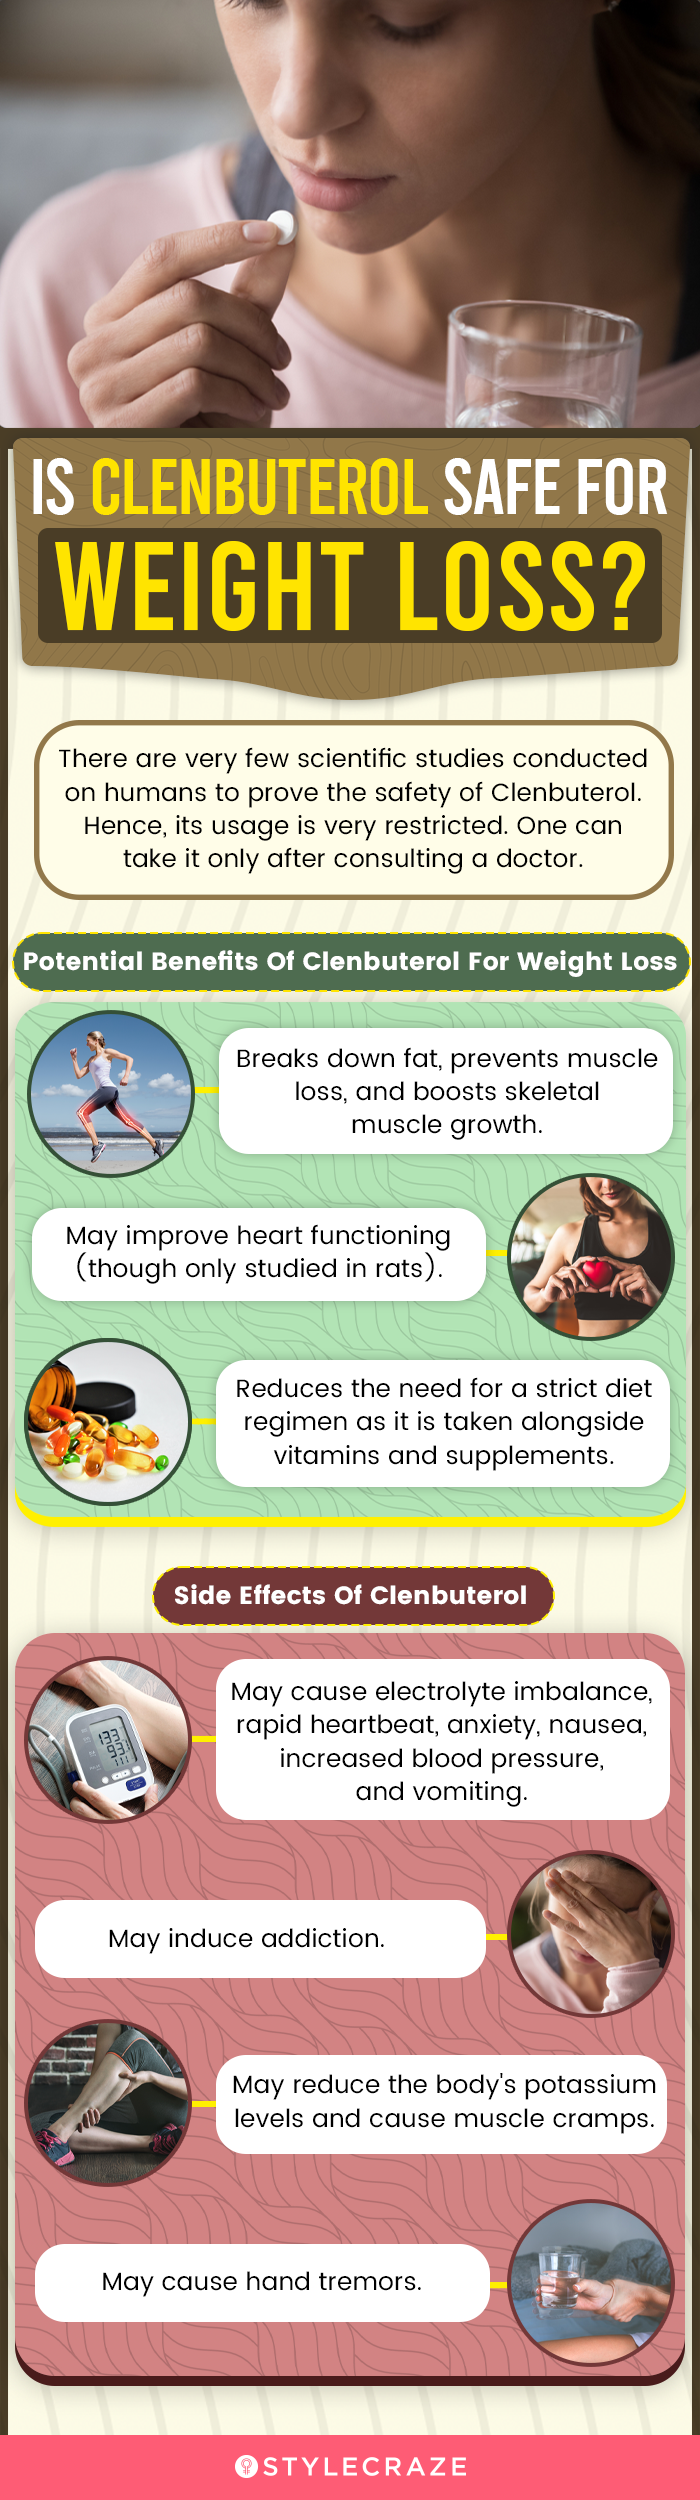 is clenbuterol safe for weight loss (infographic)